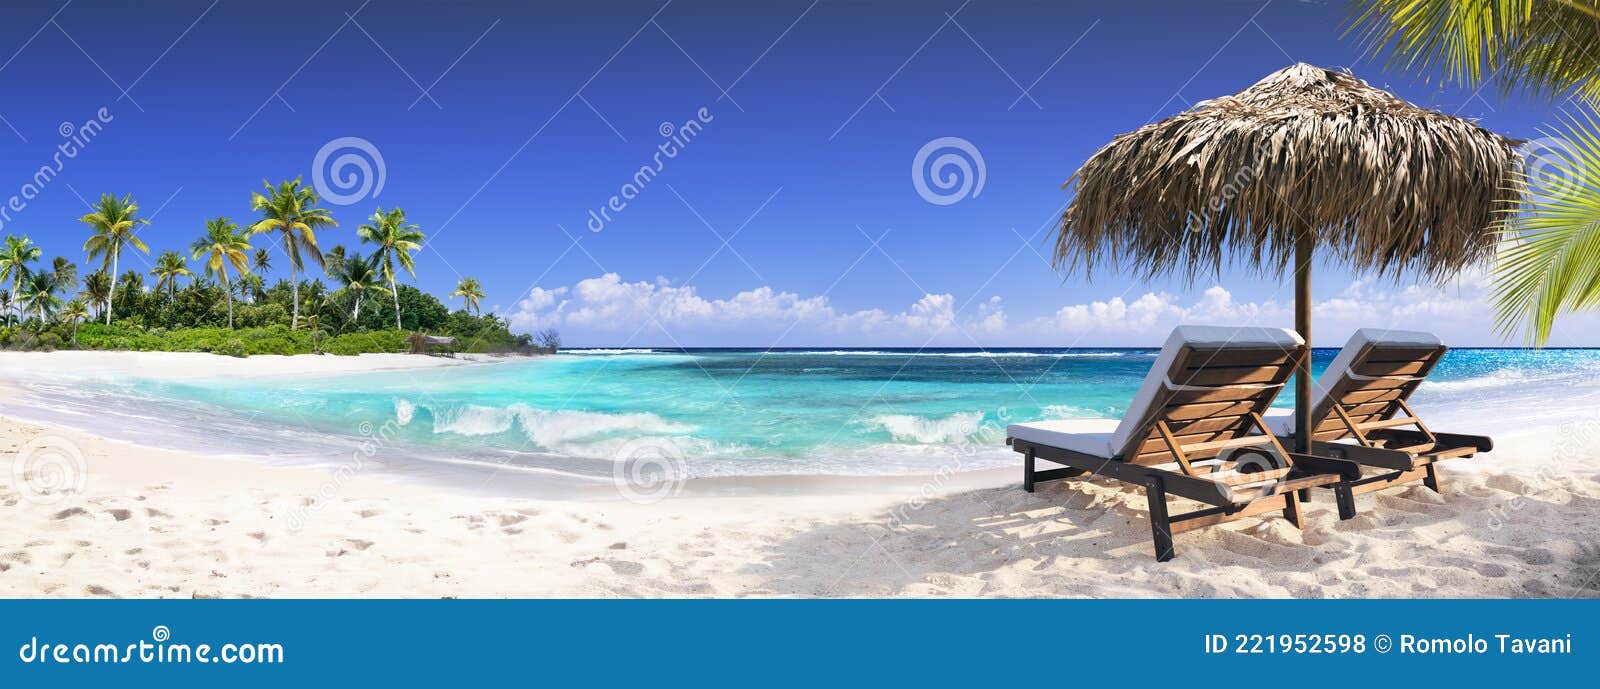 chairs in tropical beach with palm trees